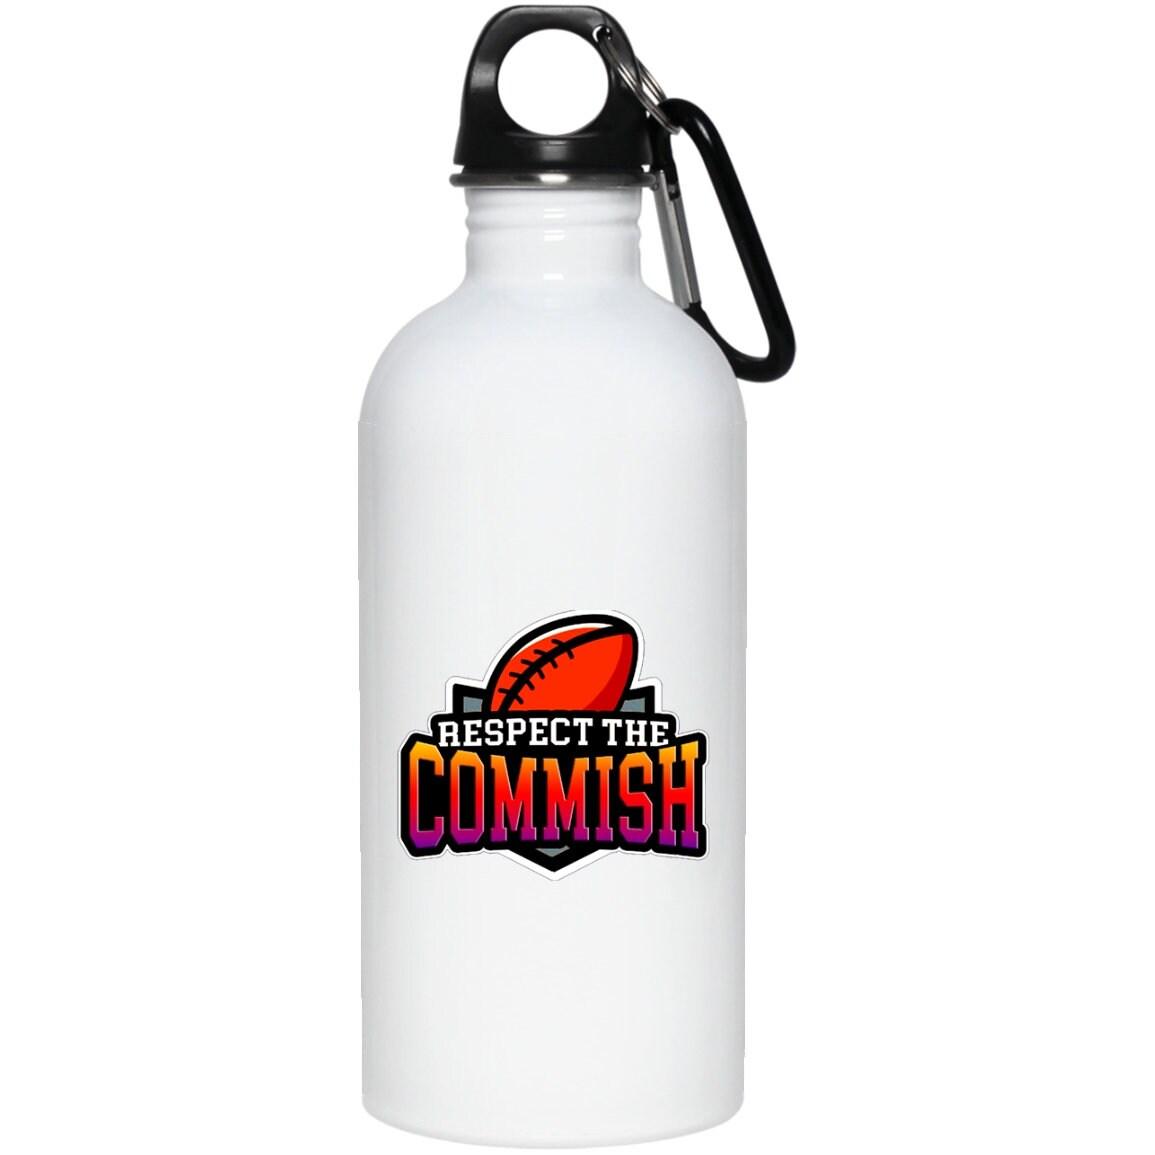 Respect the Commish 20 oz. Stainless Steel Water Bottle - plusminusco.com